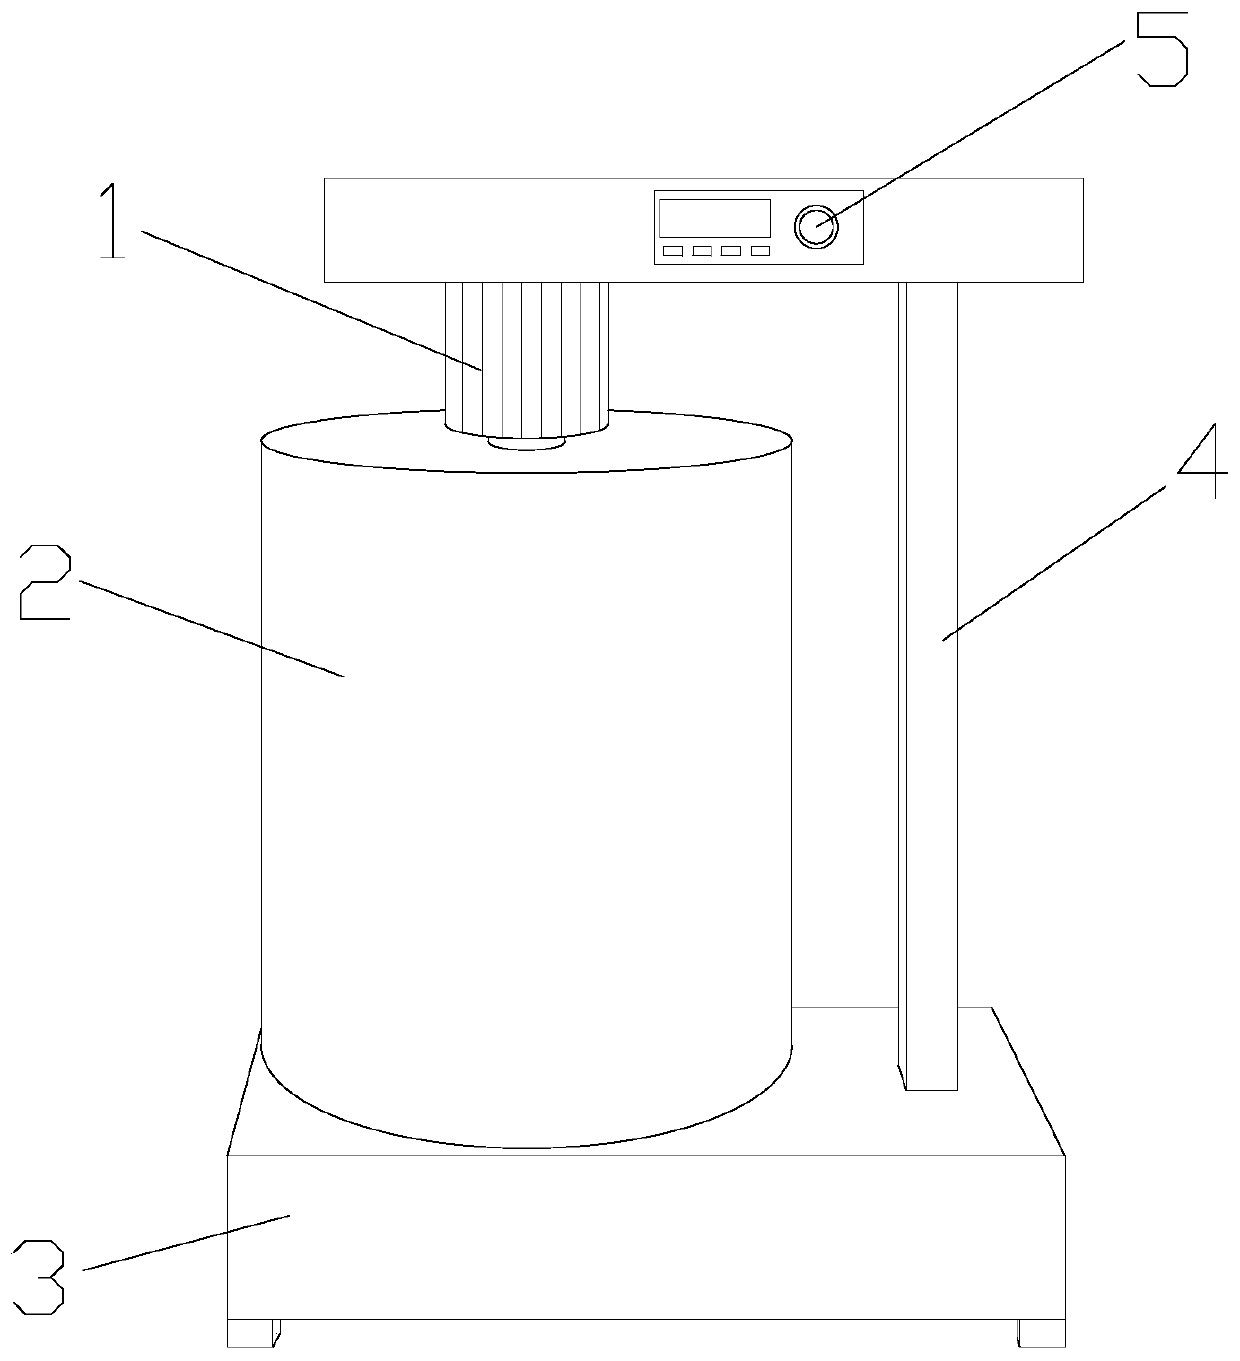 A preliminary cleaning device for livestock farm wool using centrifugal treatment